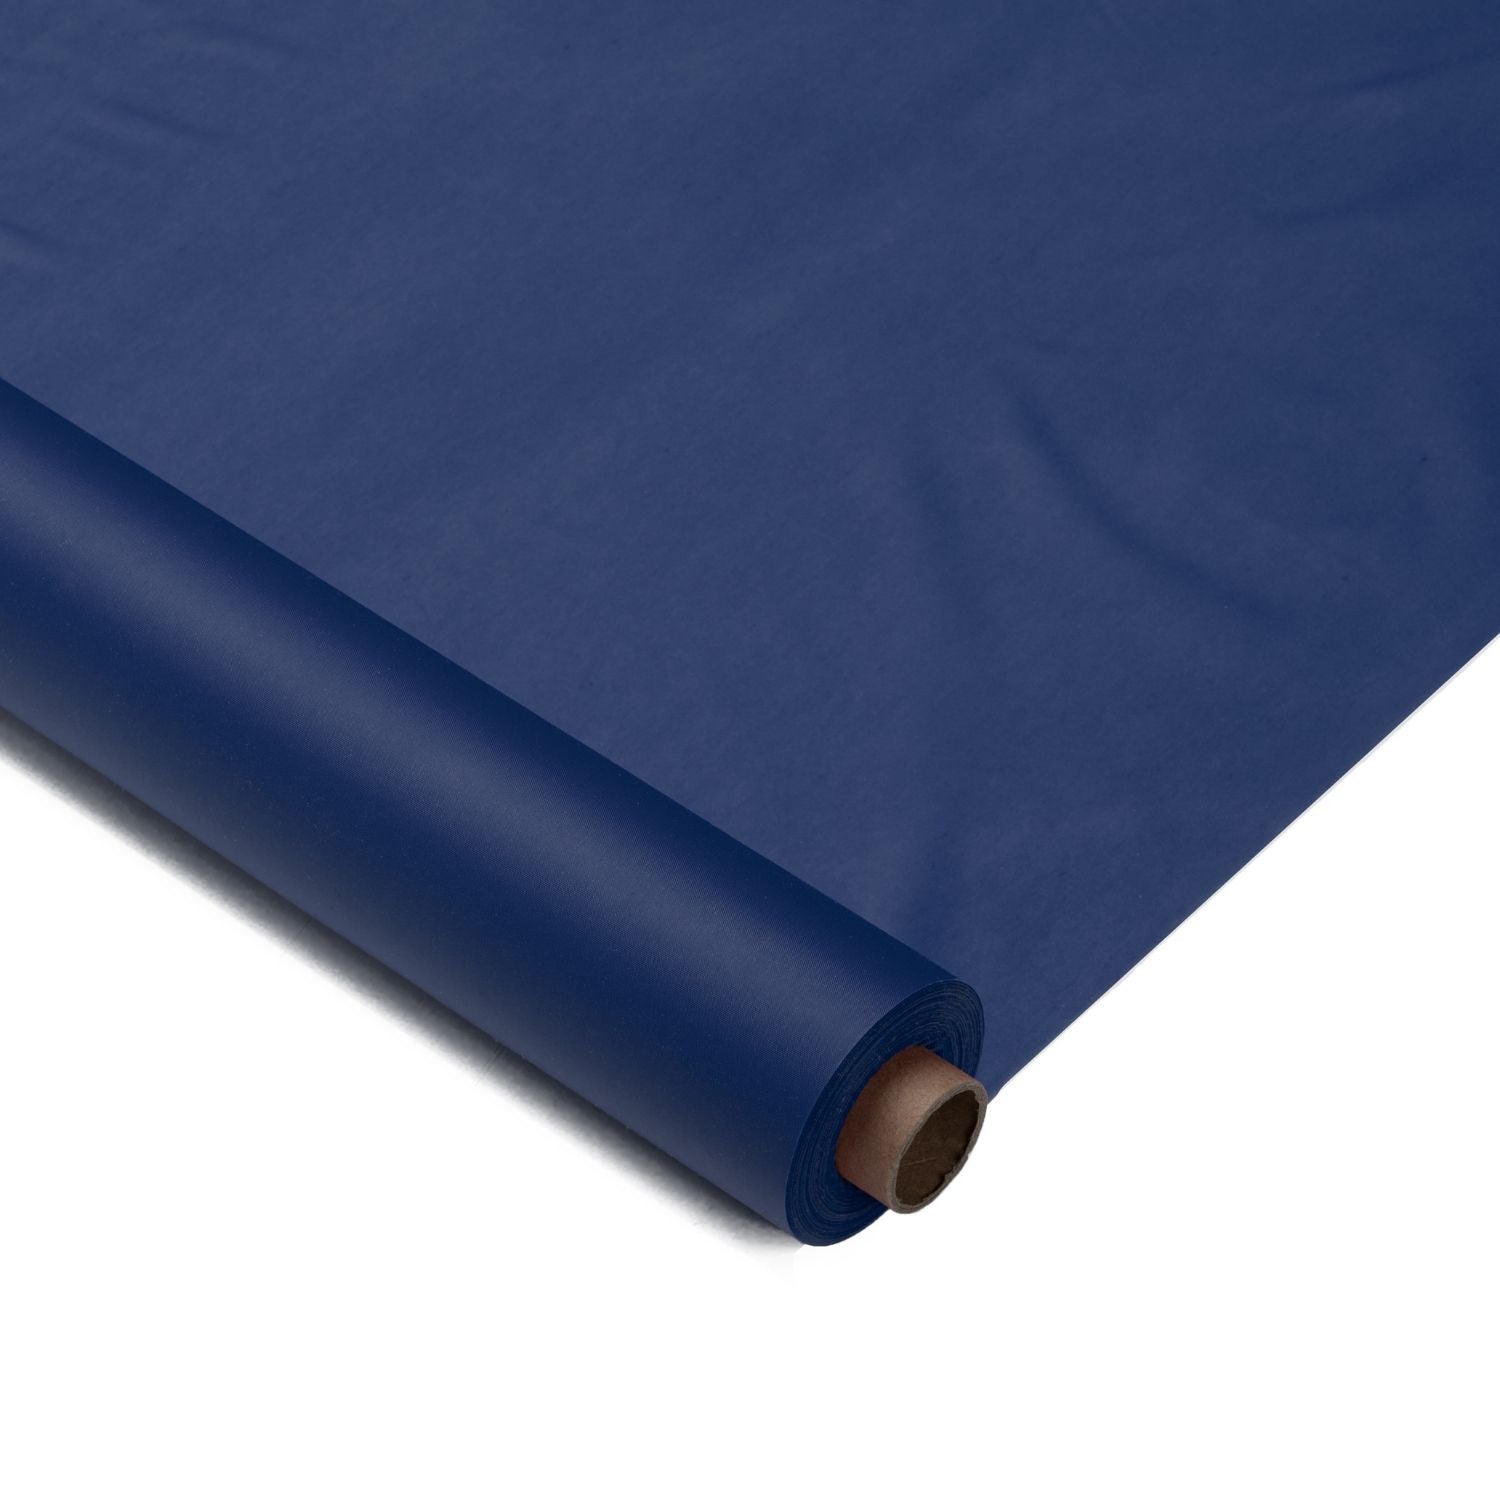 40 In. X 300 Ft. Premium Navy Plastic Table Roll | 4 Pack